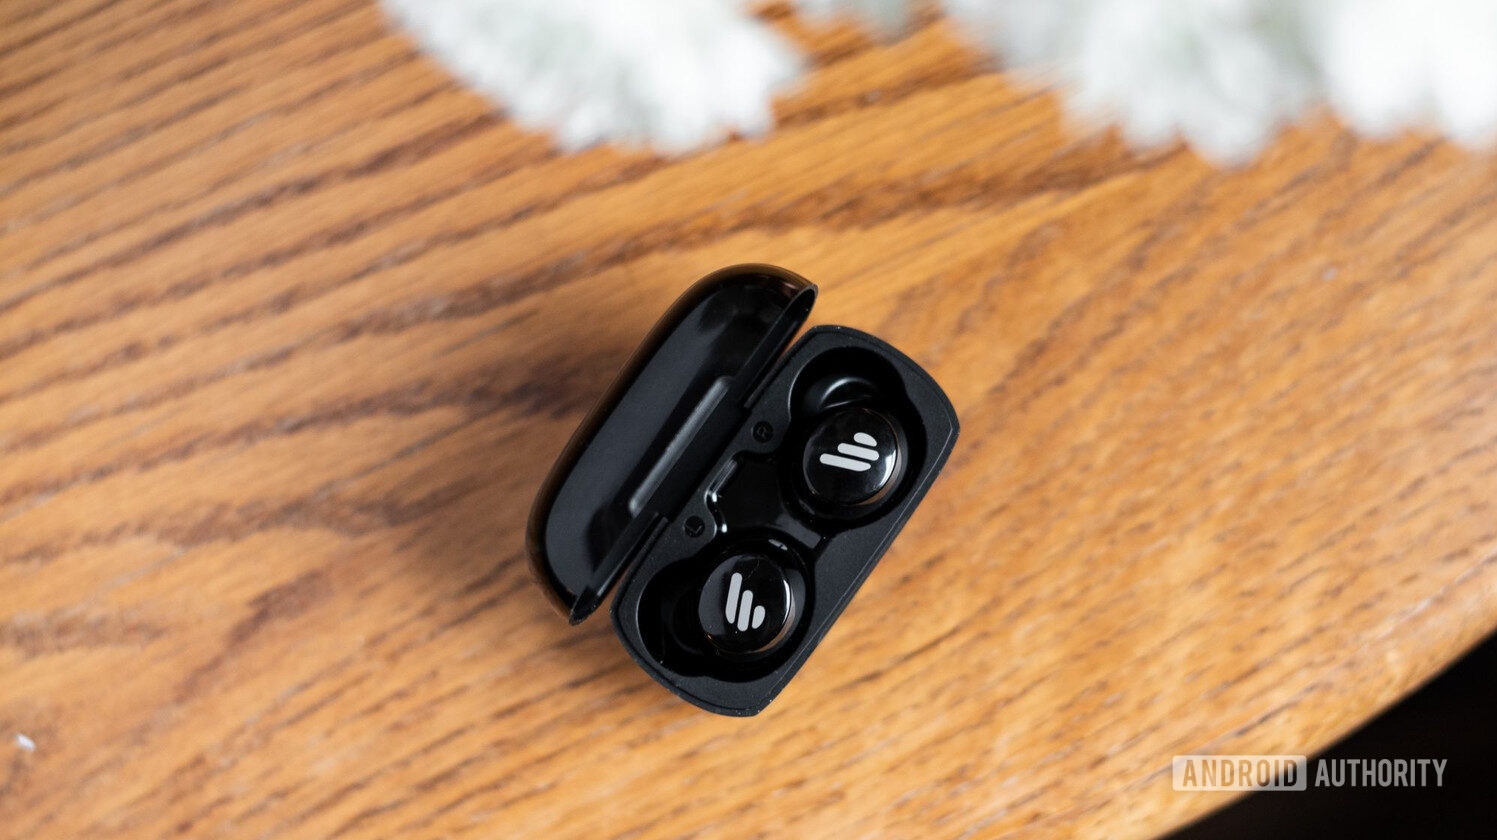 The Edifier TWS1 true wireless earbuds in the case on a wooden table.